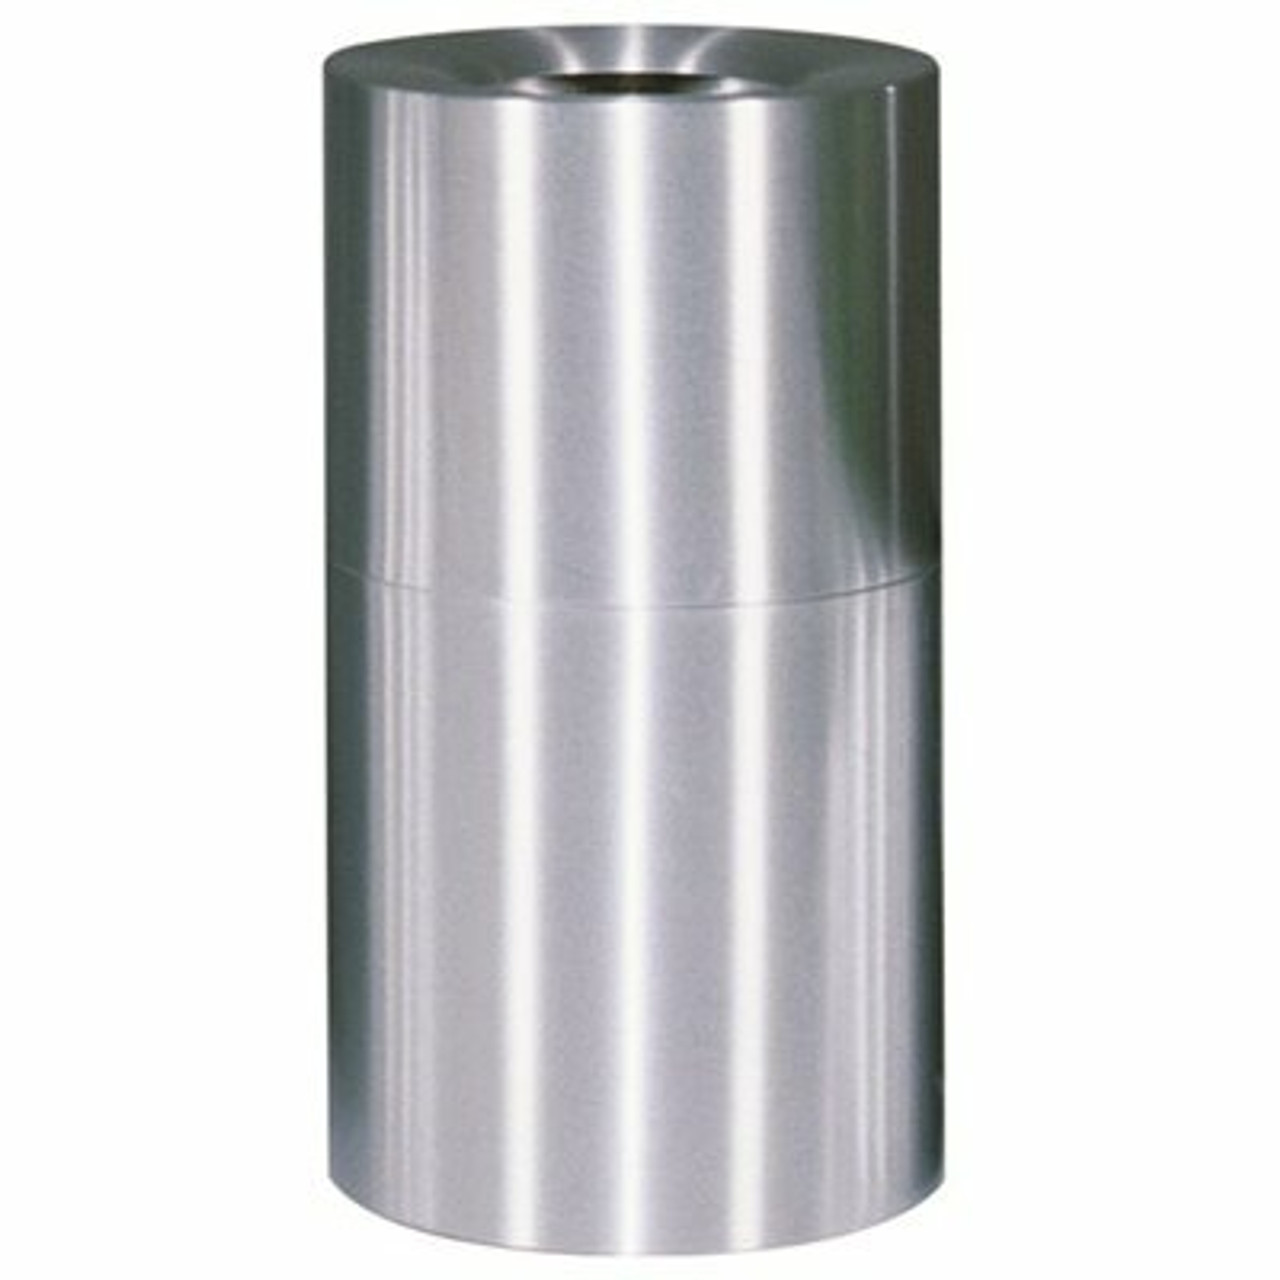 Rubbermaid Commercial Products Atrium 35 Gal. Satin Stainless Steel Open Top Trash Can